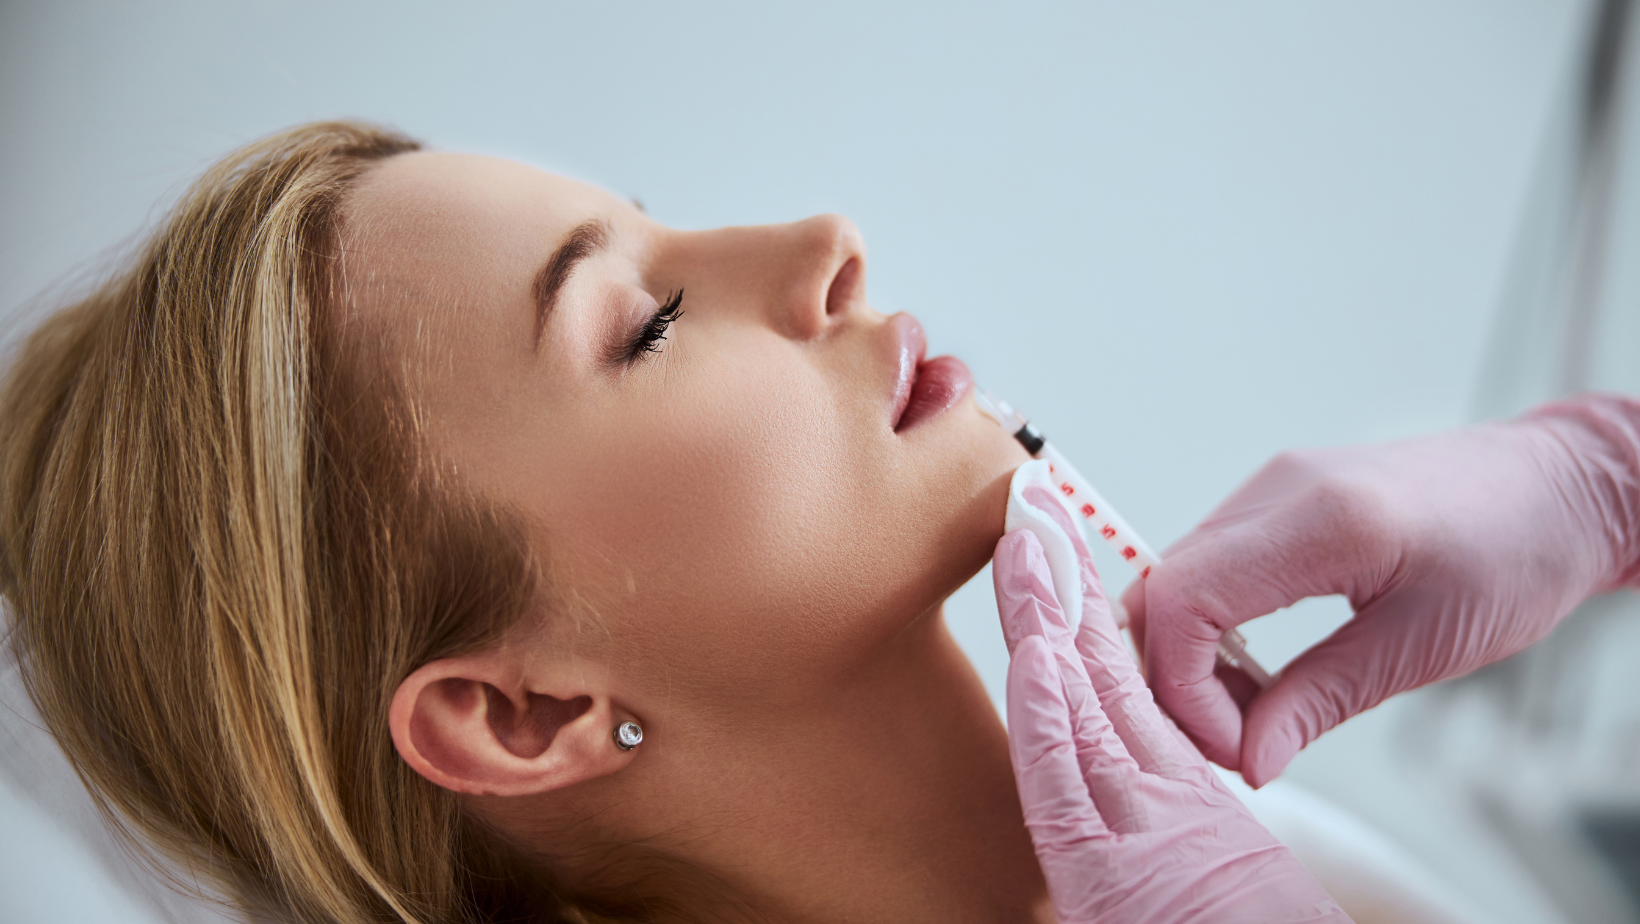 Guide to Juvéderm Fillers in Chevy Chase